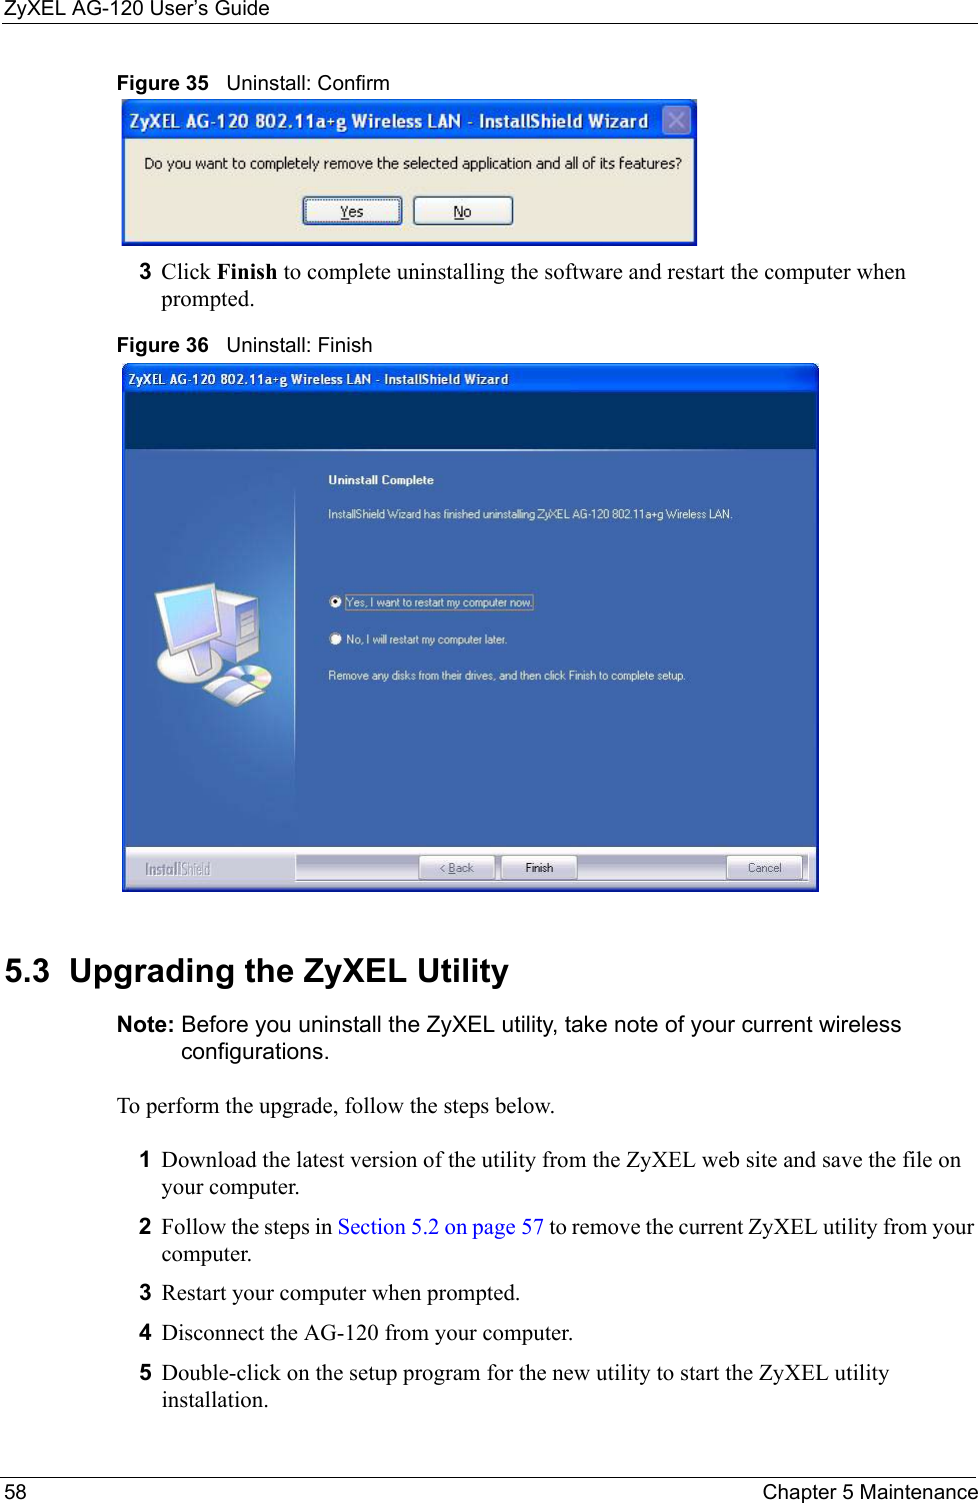 ZyXEL AG-120 User’s Guide58 Chapter 5 MaintenanceFigure 35   Uninstall: Confirm  3Click Finish to complete uninstalling the software and restart the computer when prompted.Figure 36   Uninstall: Finish 5.3  Upgrading the ZyXEL Utility Note: Before you uninstall the ZyXEL utility, take note of your current wireless configurations.To perform the upgrade, follow the steps below.1Download the latest version of the utility from the ZyXEL web site and save the file on your computer.2Follow the steps in Section 5.2 on page 57 to remove the current ZyXEL utility from your computer.3Restart your computer when prompted.4Disconnect the AG-120 from your computer.5Double-click on the setup program for the new utility to start the ZyXEL utility installation.